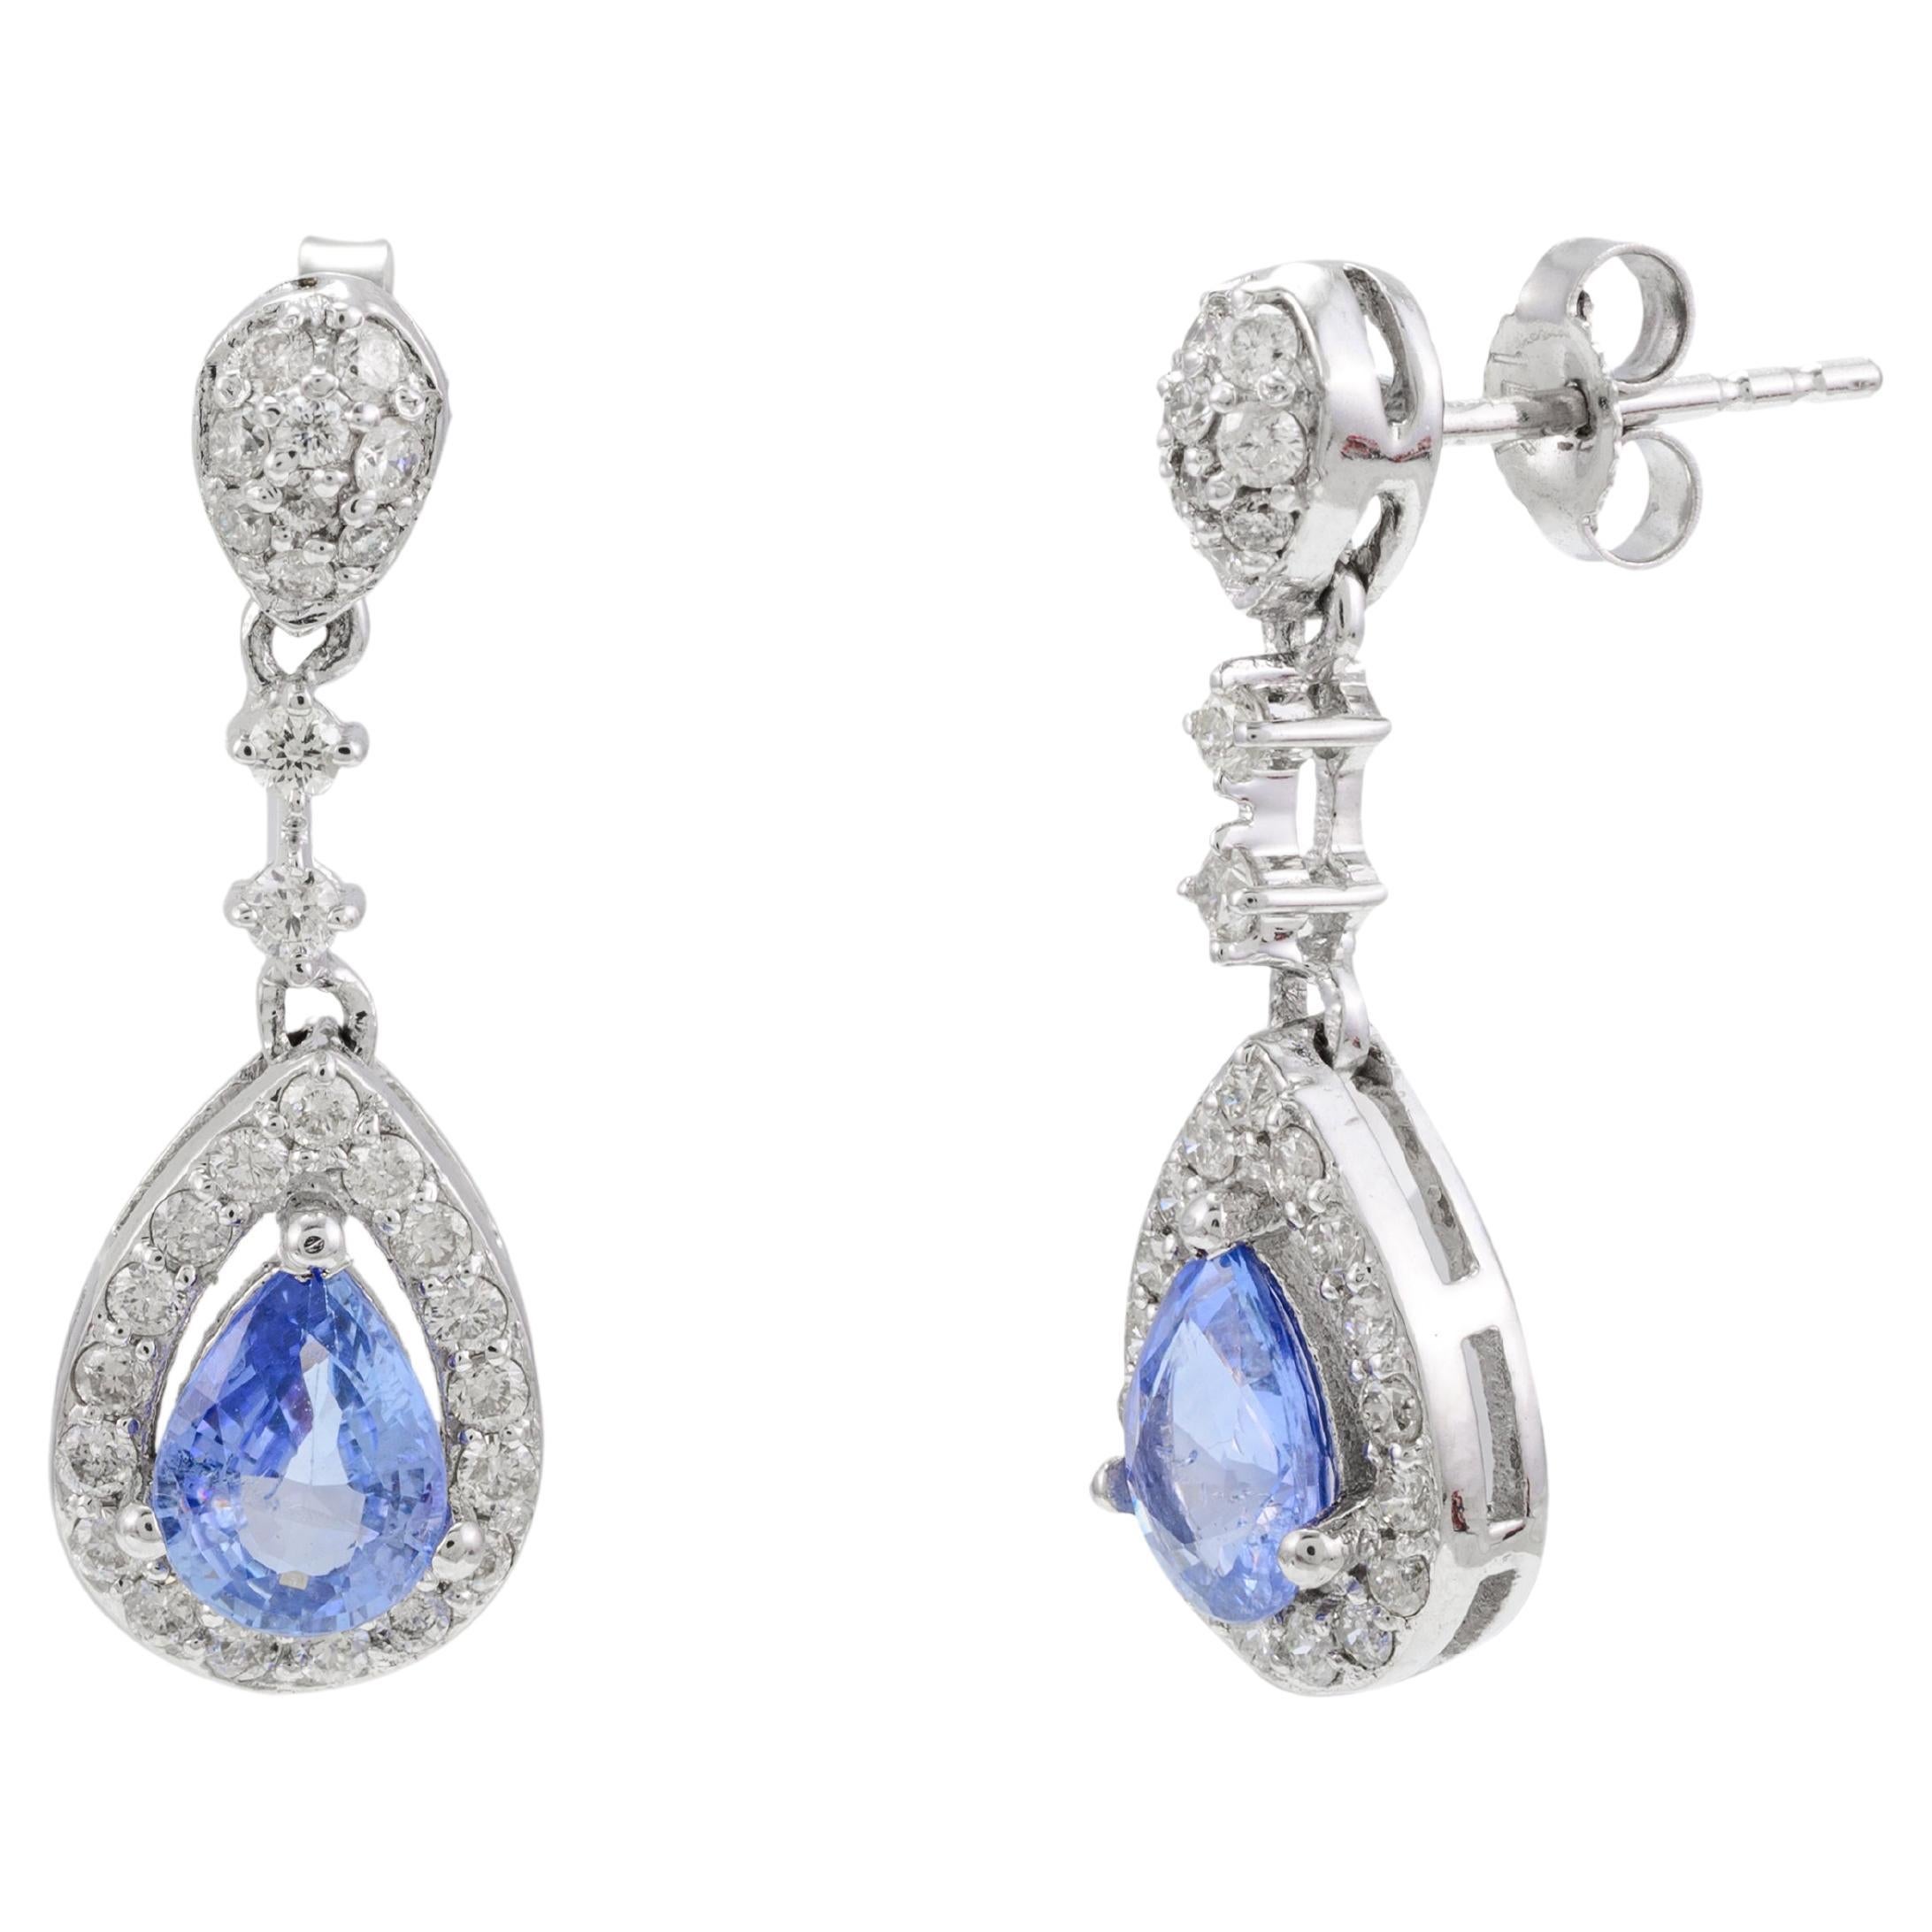 Genuine Blue Sapphire and Diamond Wedding Earrings in 14k Solid White Gold